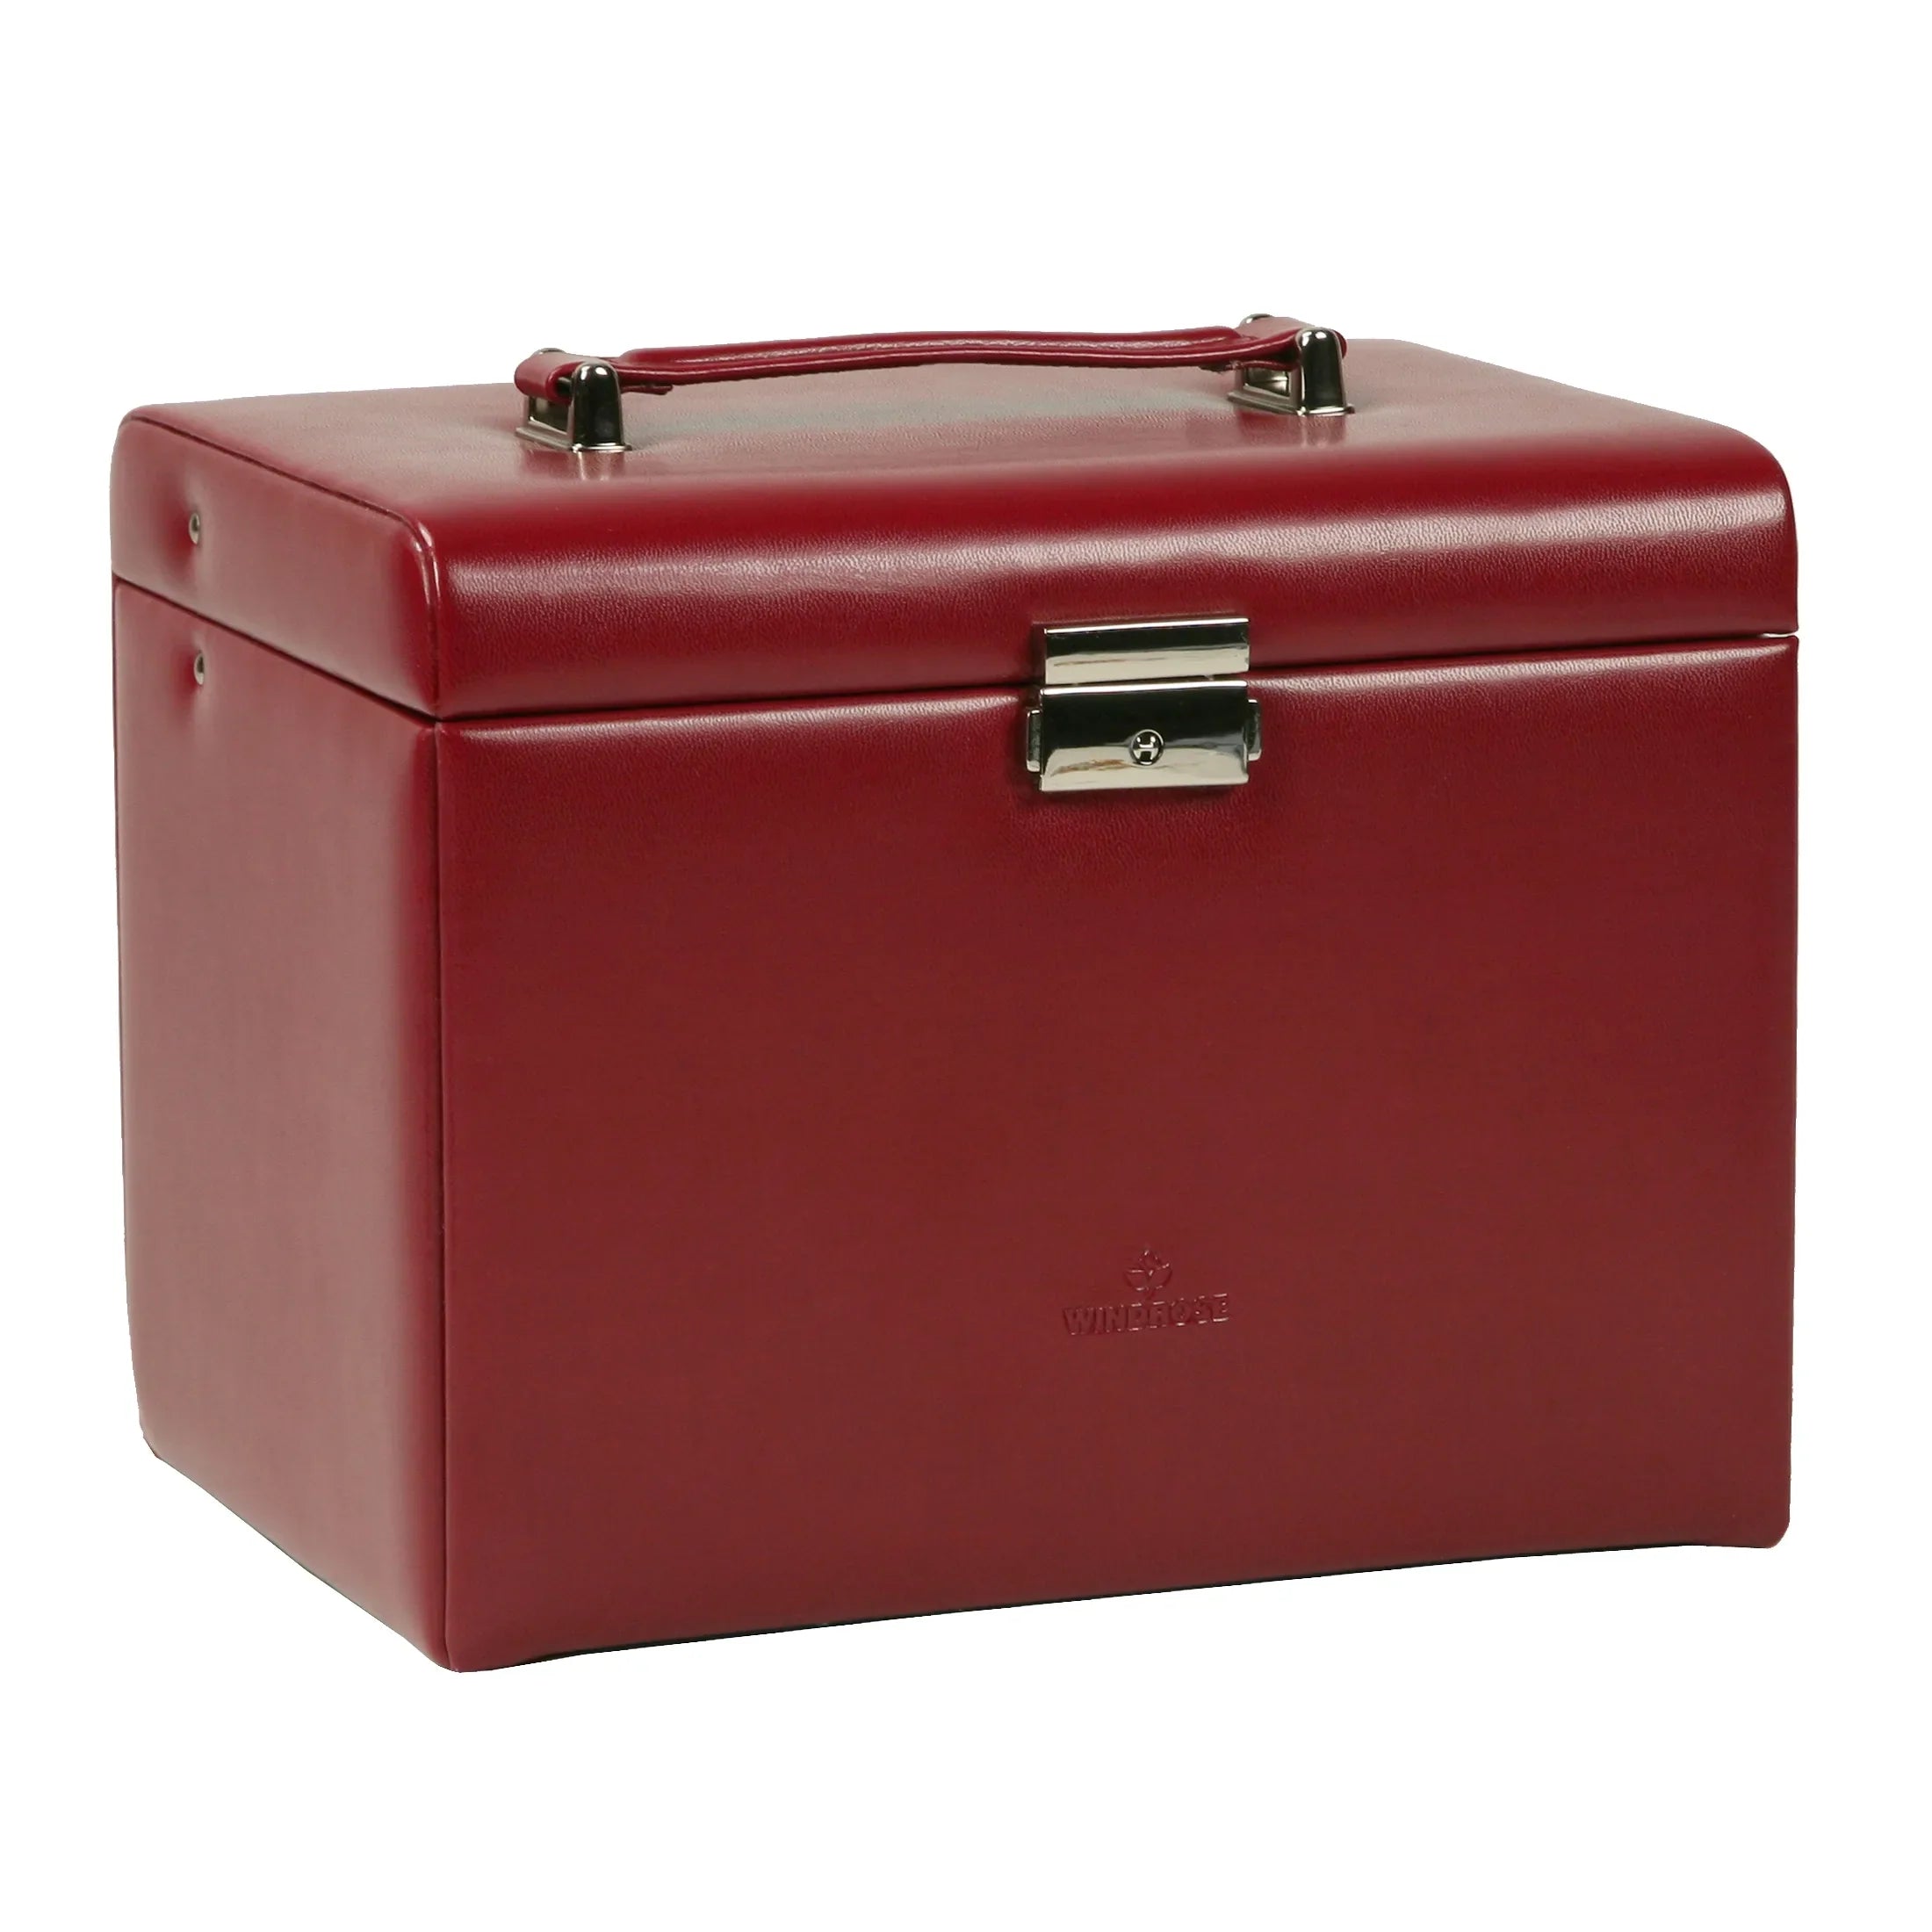 Windrose Merino jewelry case with jewelry bag 26 cm - red